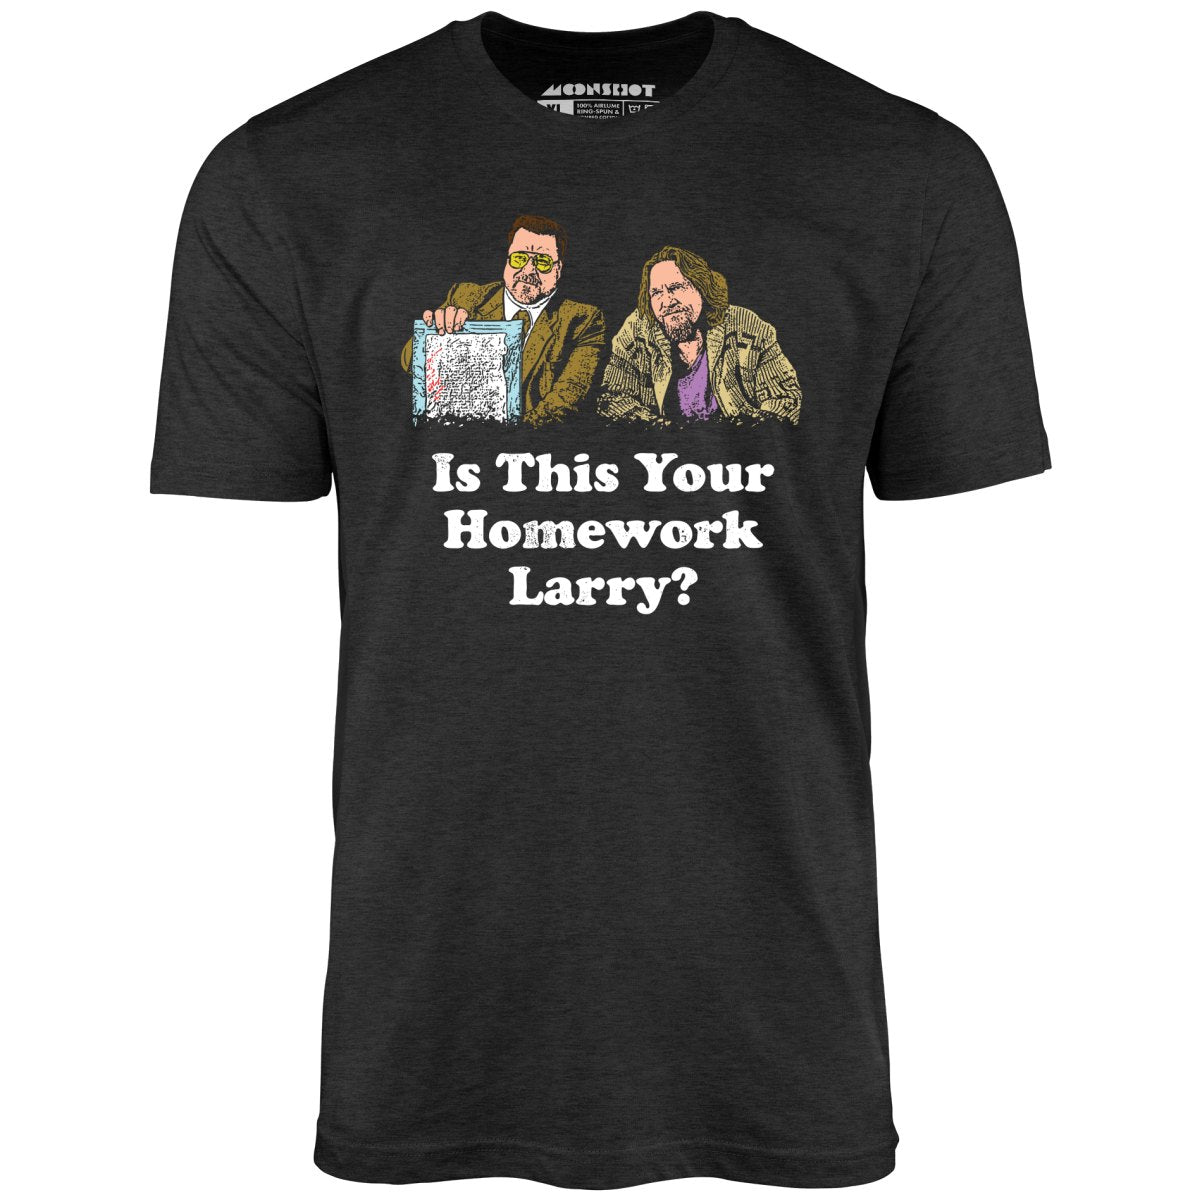 Is This Your Homework, Larry? - Unisex T-Shirt